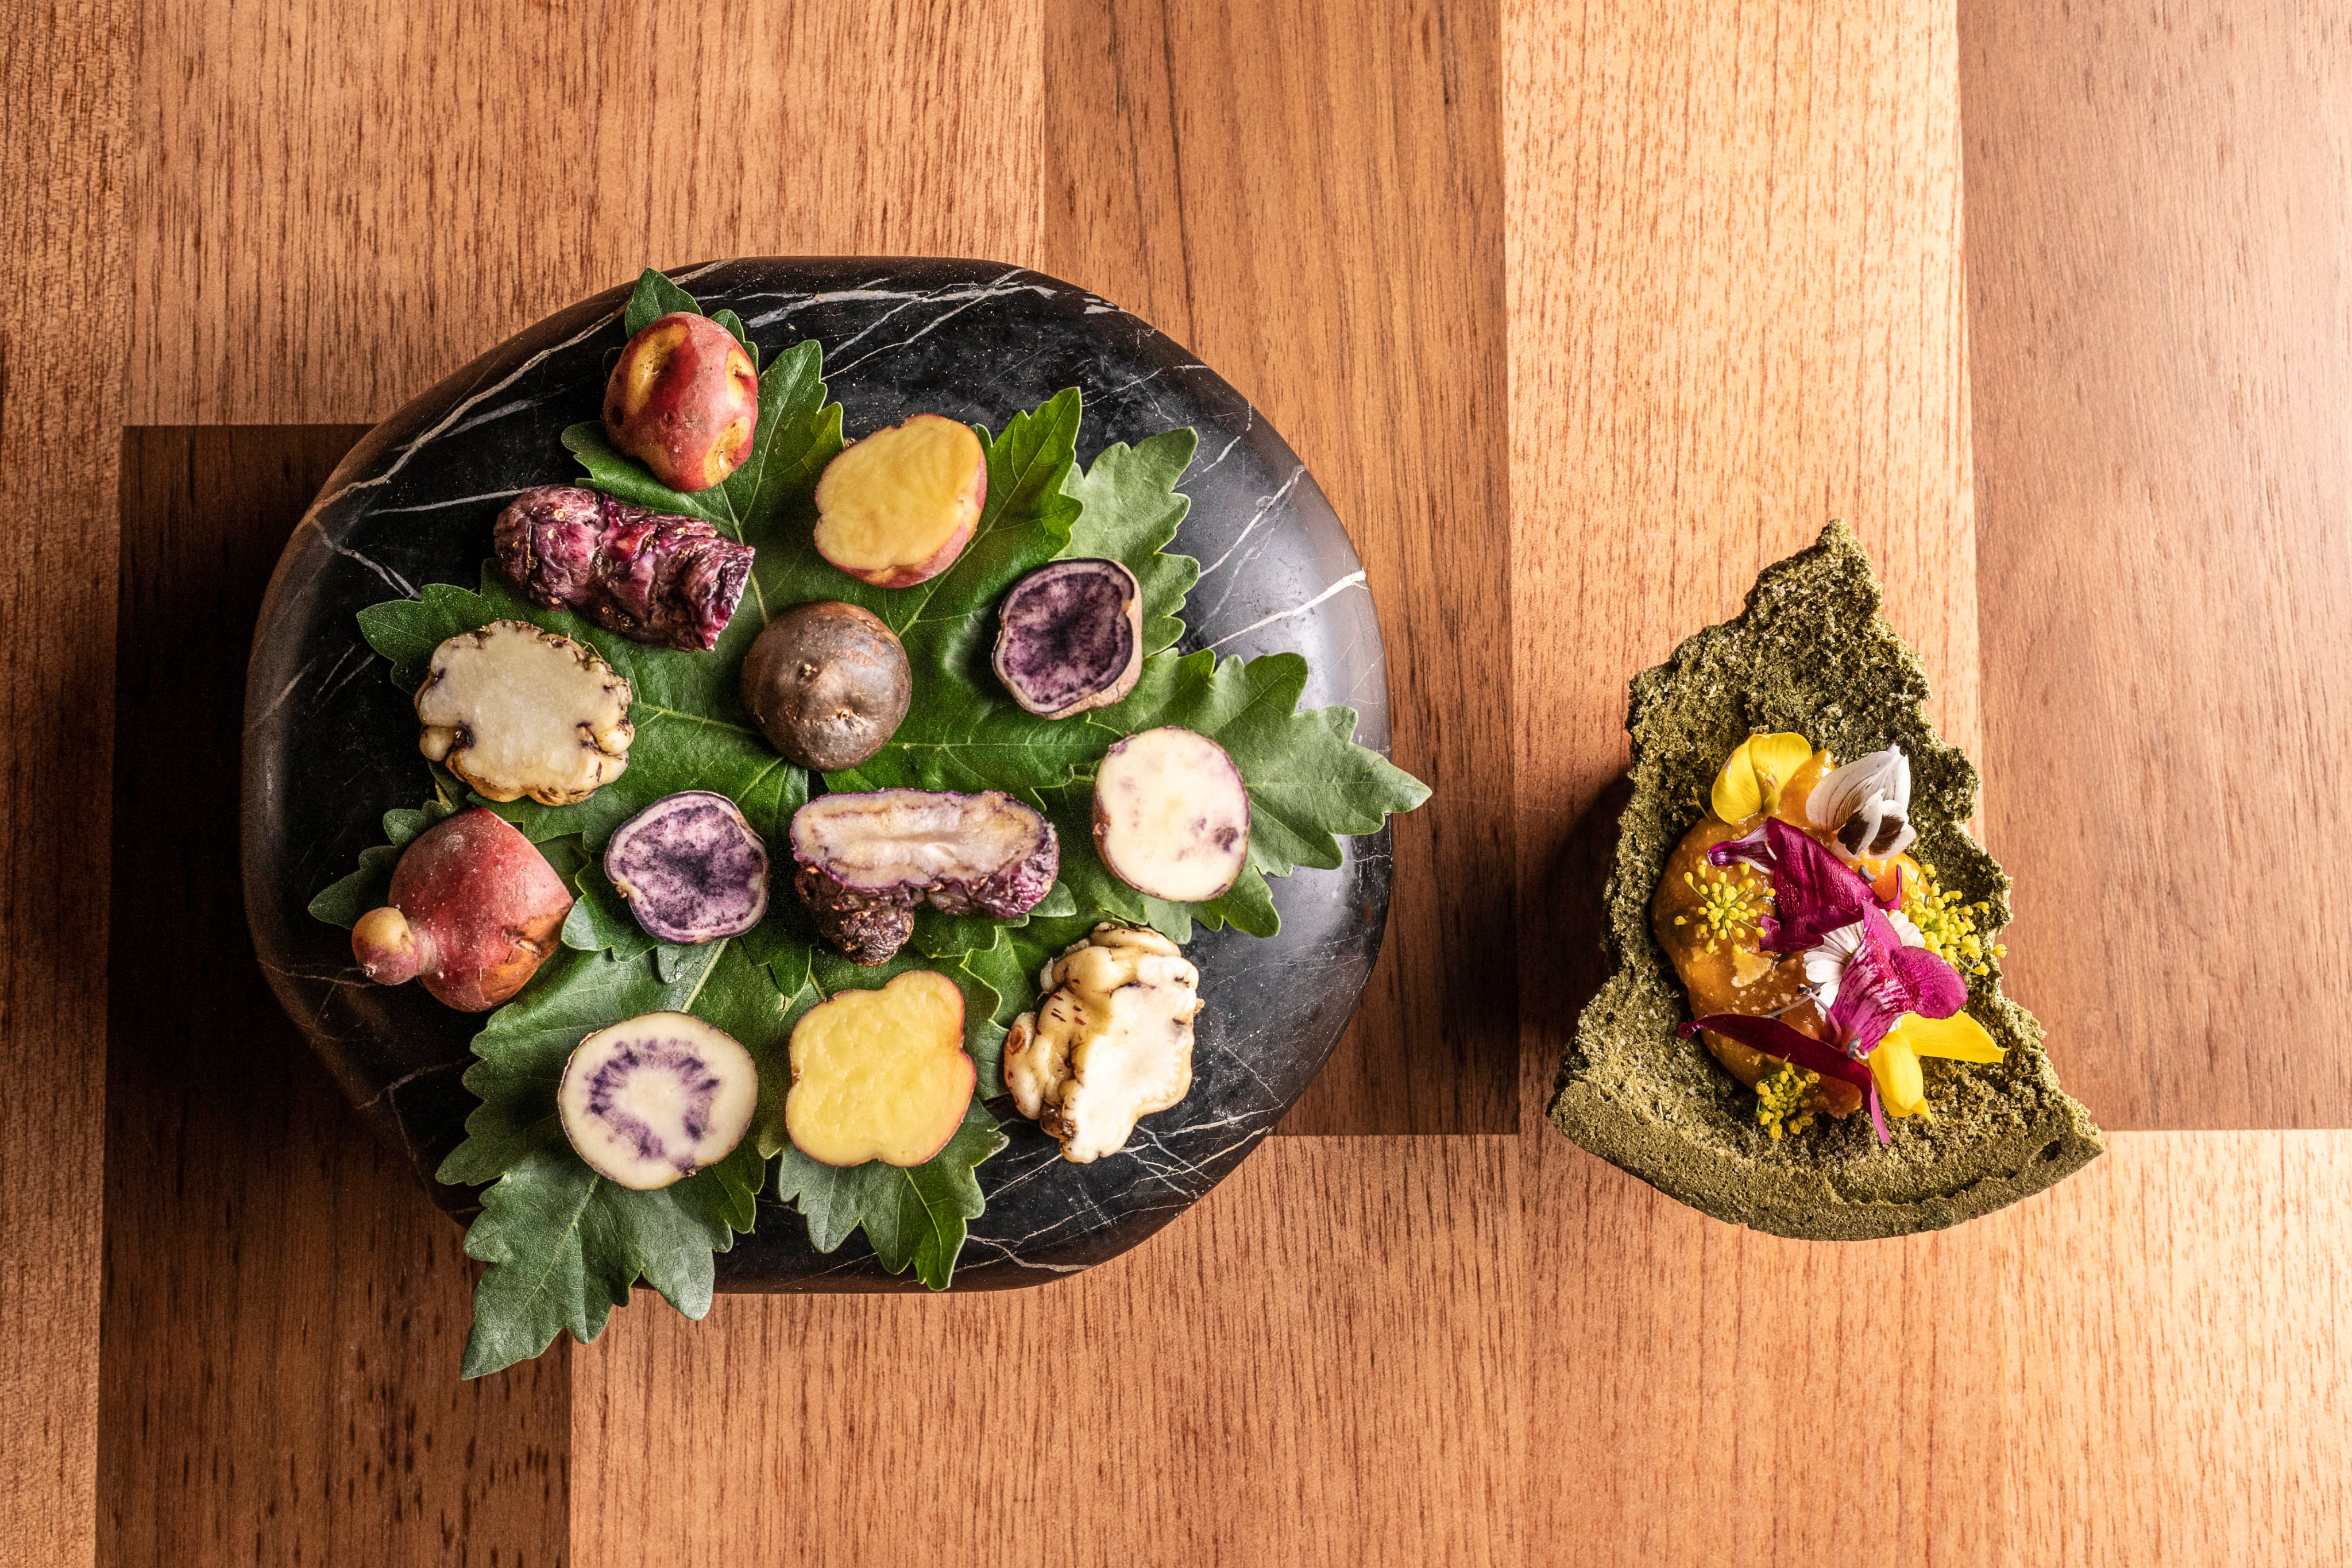 Mil’s menu makes use of Peru’s myriad varieties of potatoes (left), and native ingredients including pungent herbs (right). The restaurant was opened by the same people behind Central, winner of the 2023 World’s 50 Best Restaurants title. Photo: Ken Motohasi